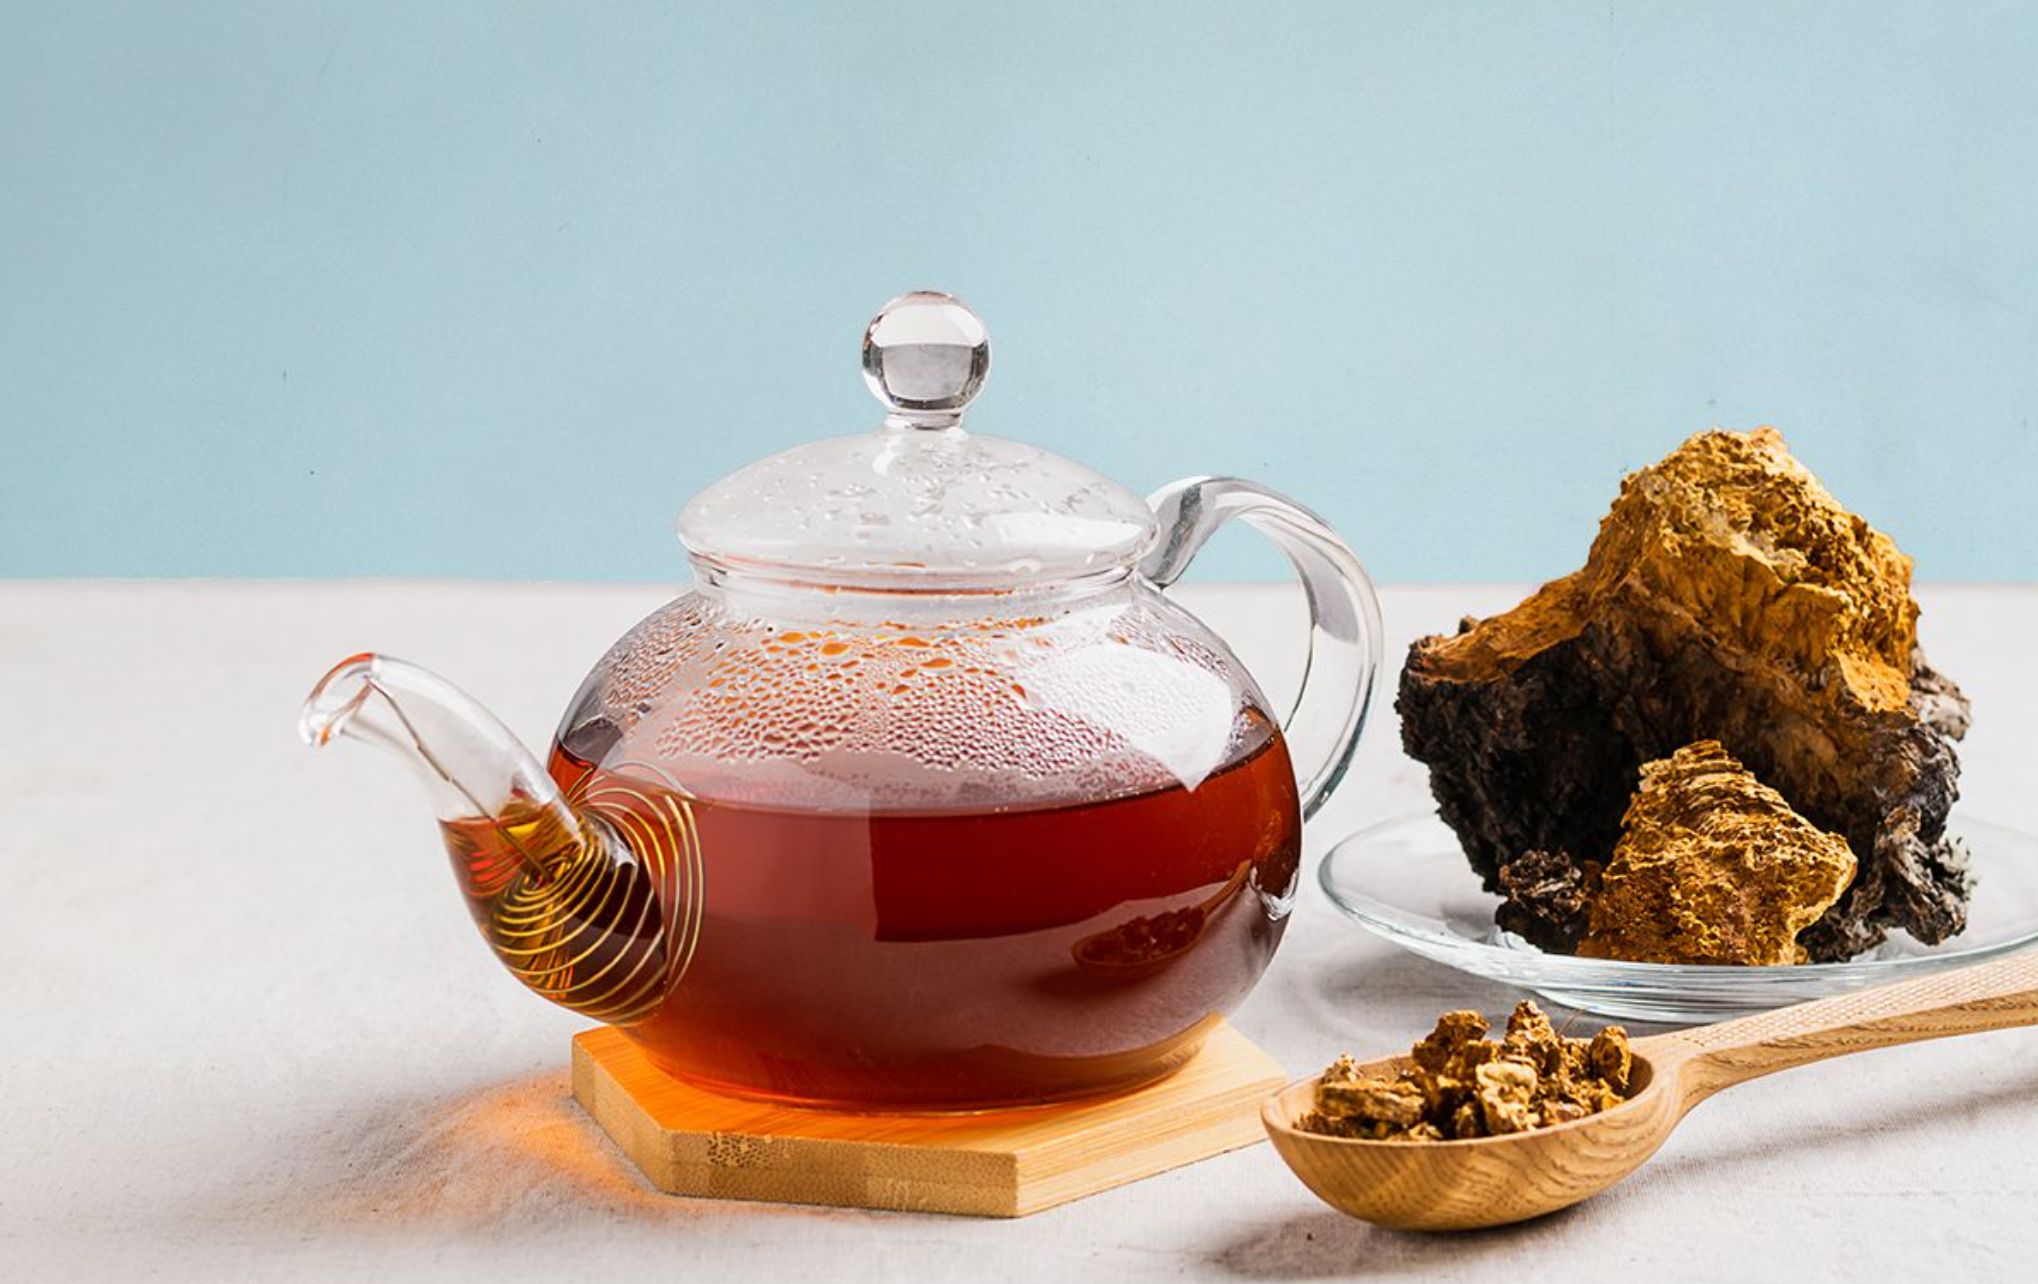 Mushroom Teas for Relaxation and Stress Relief